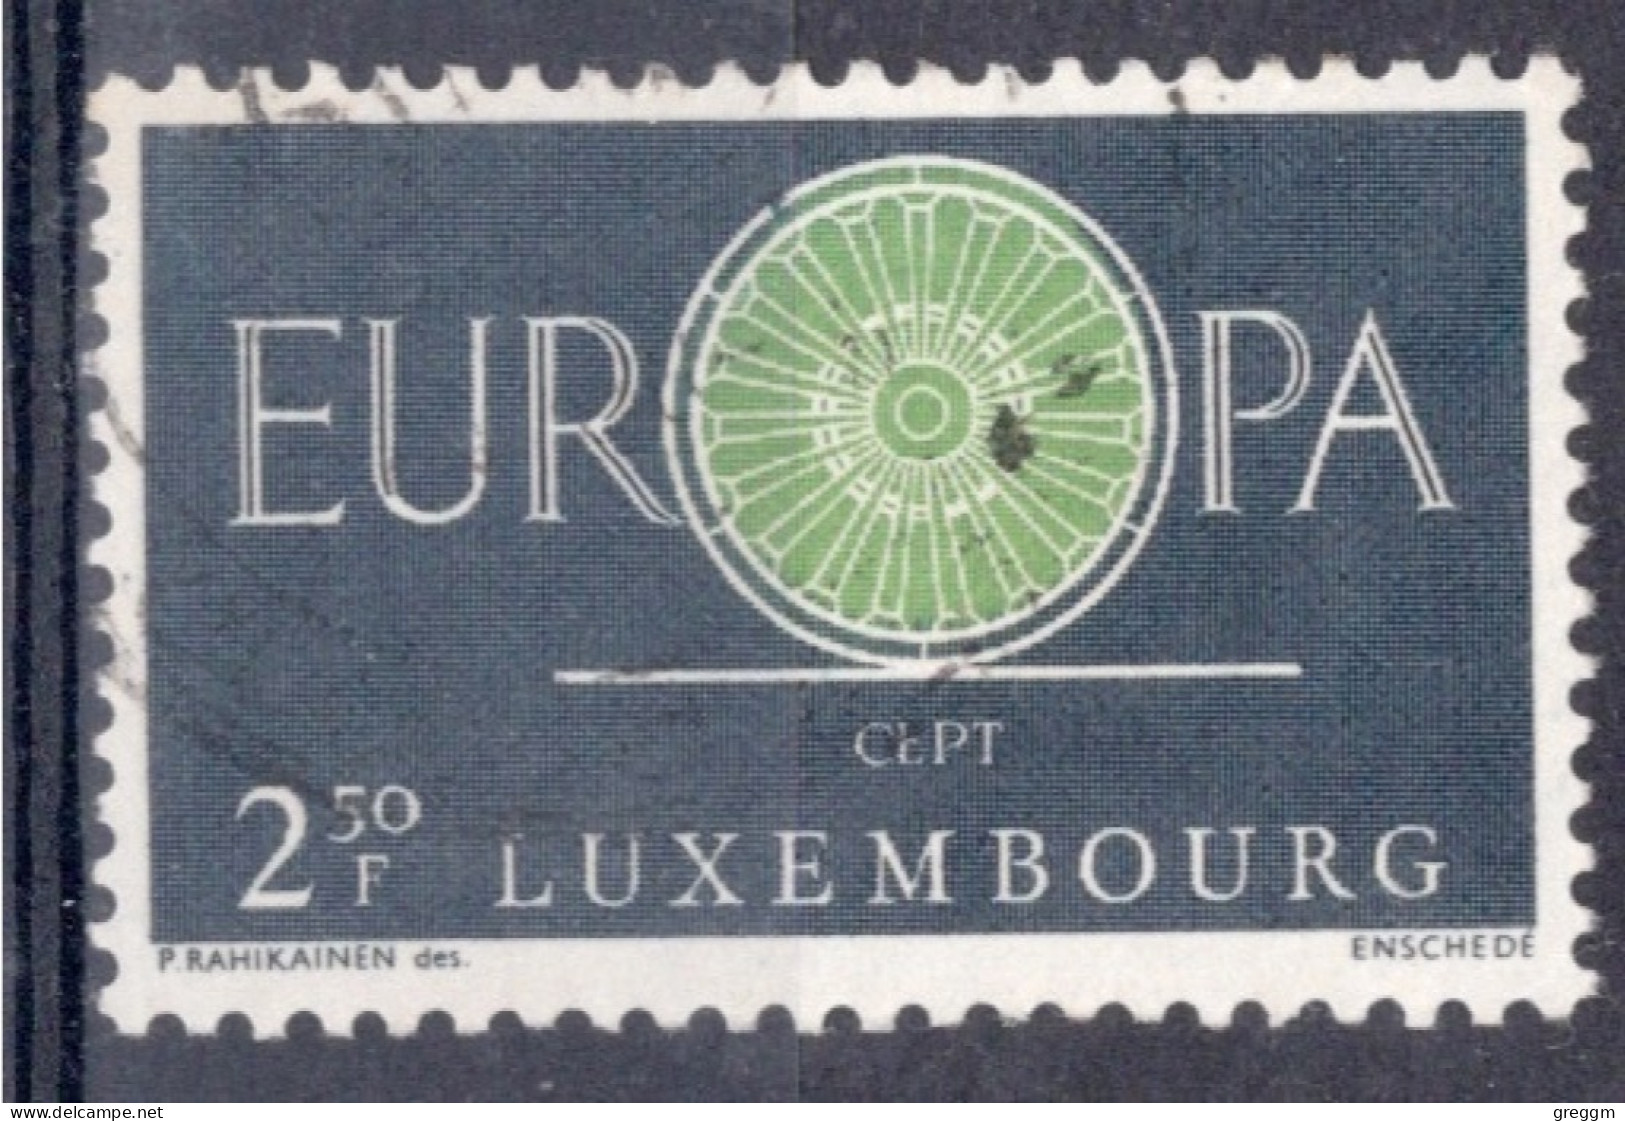 Luxembourg 1960  Single Stamp Issued To Celebrate EUROPA In Fine Used - Gebruikt